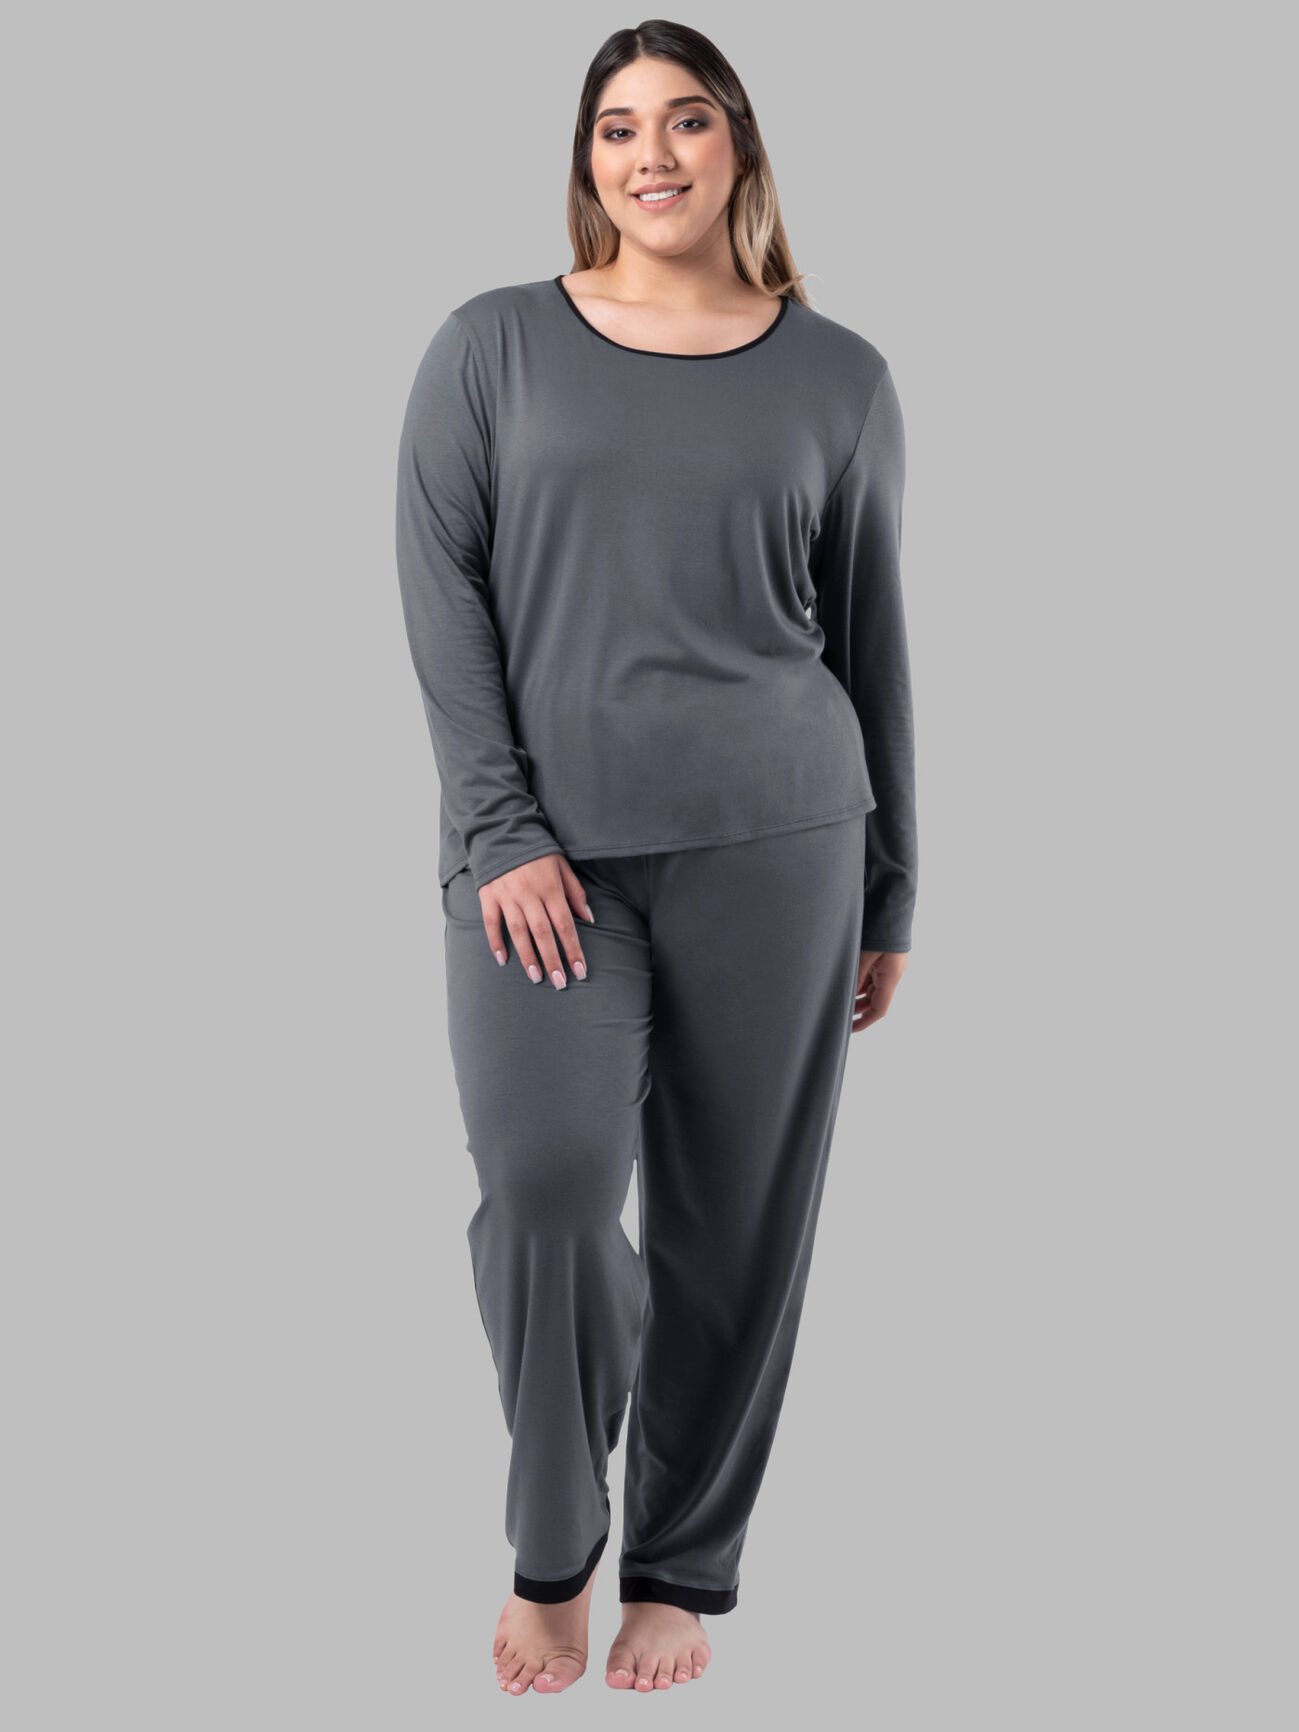 Women's Plus Fit for Me® Soft & Breathable Crew Neck Long Sleeve Shirt and Pants, 2 Piece Pajama Set MONUMENT